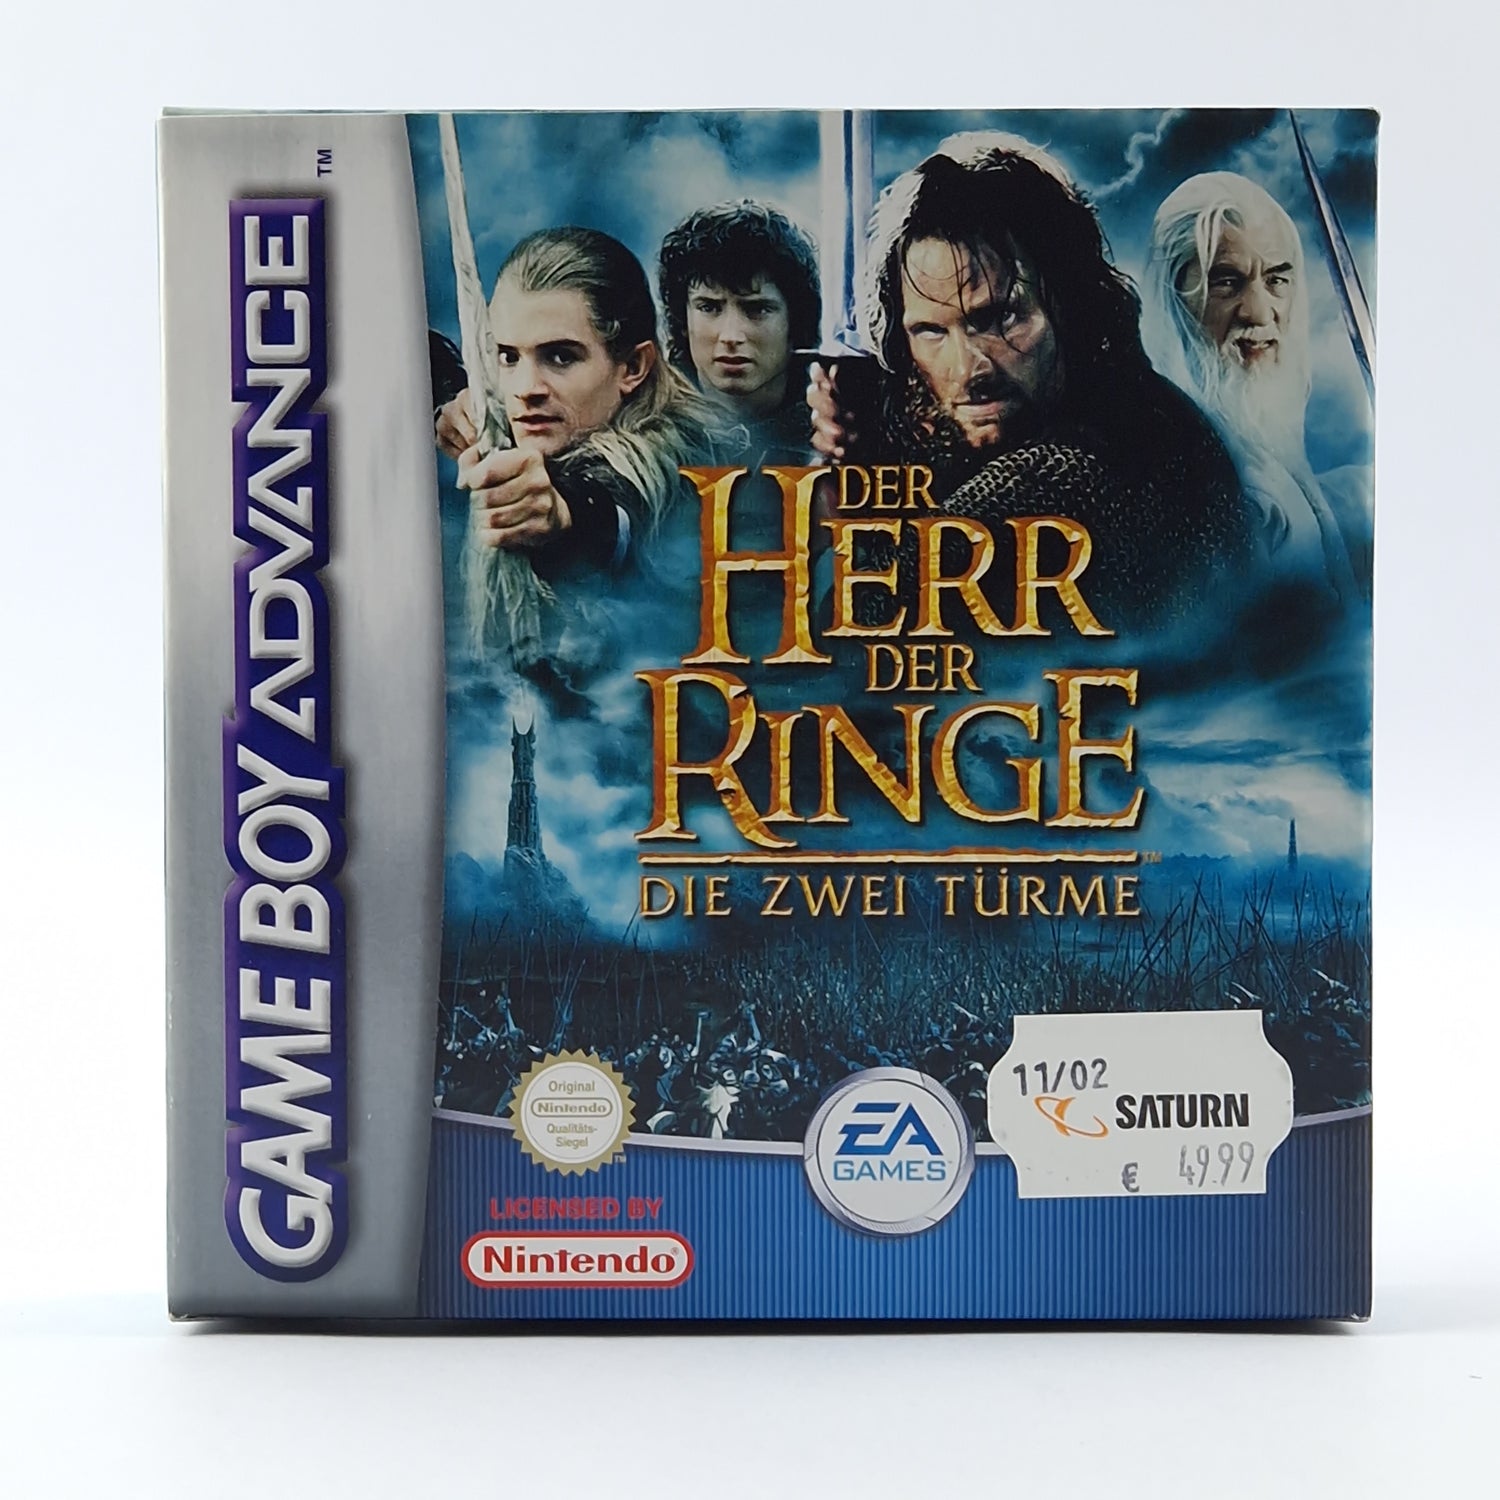 Nintendo Game Boy Advance Game: The Lord of the Rings The Two Towers - OVP PAL